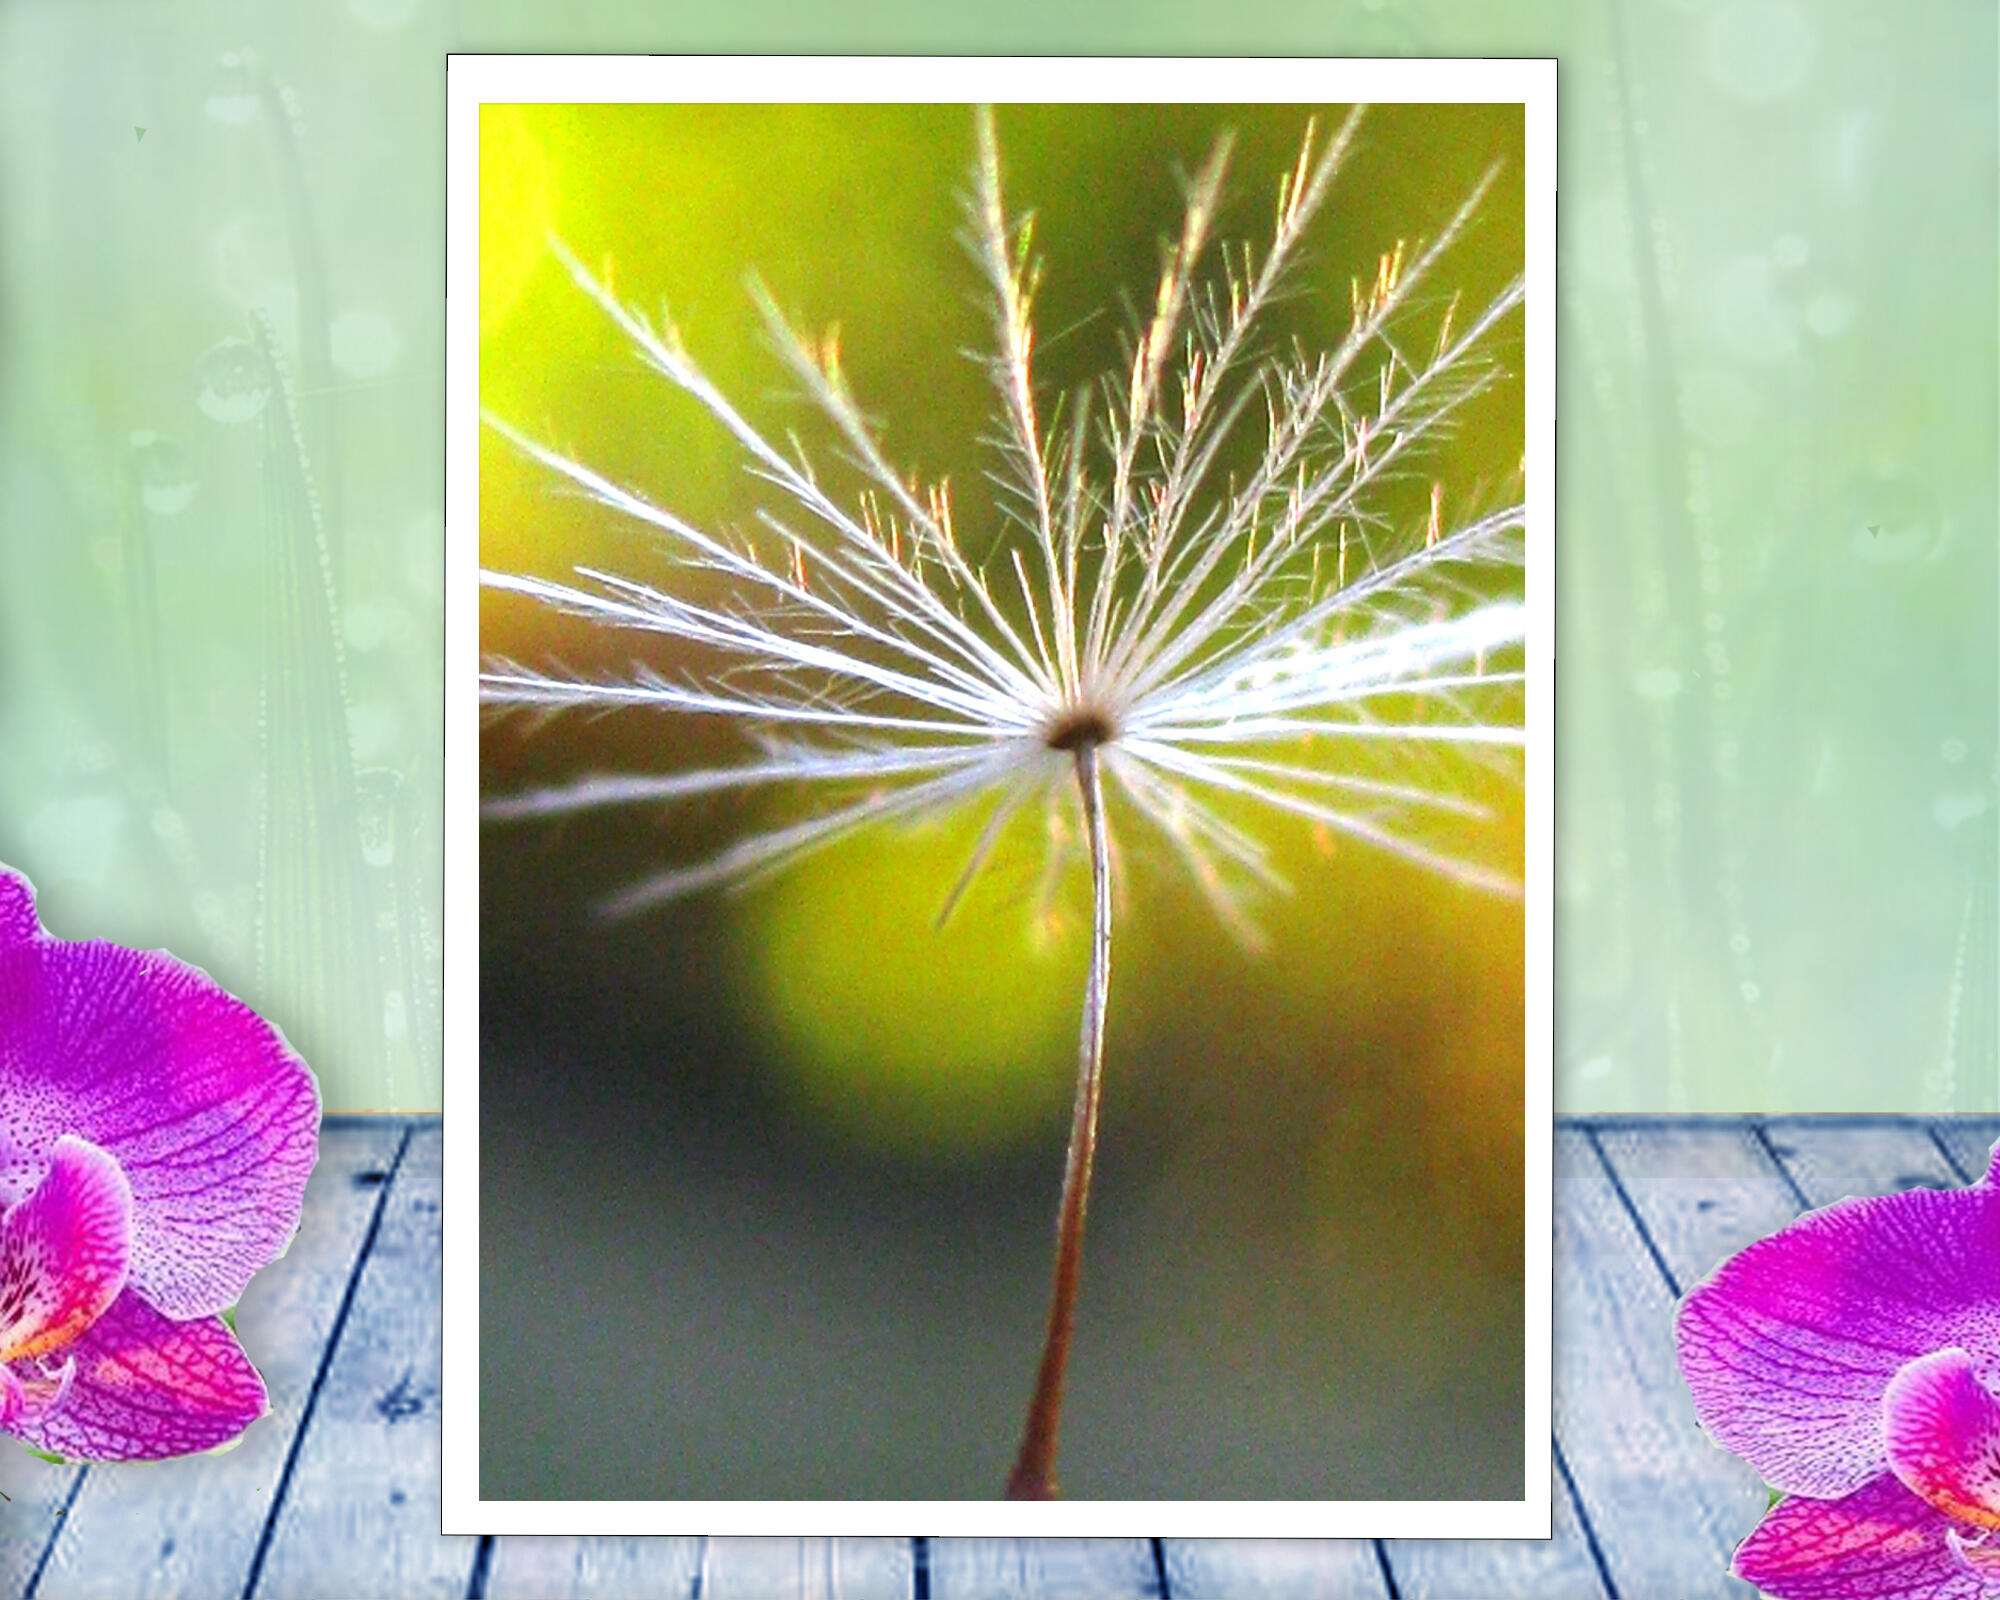 A single dandelion seed gets ready to fly in this peaceful, spiritual, photo with poem - New Soul by The Poetry of Nature